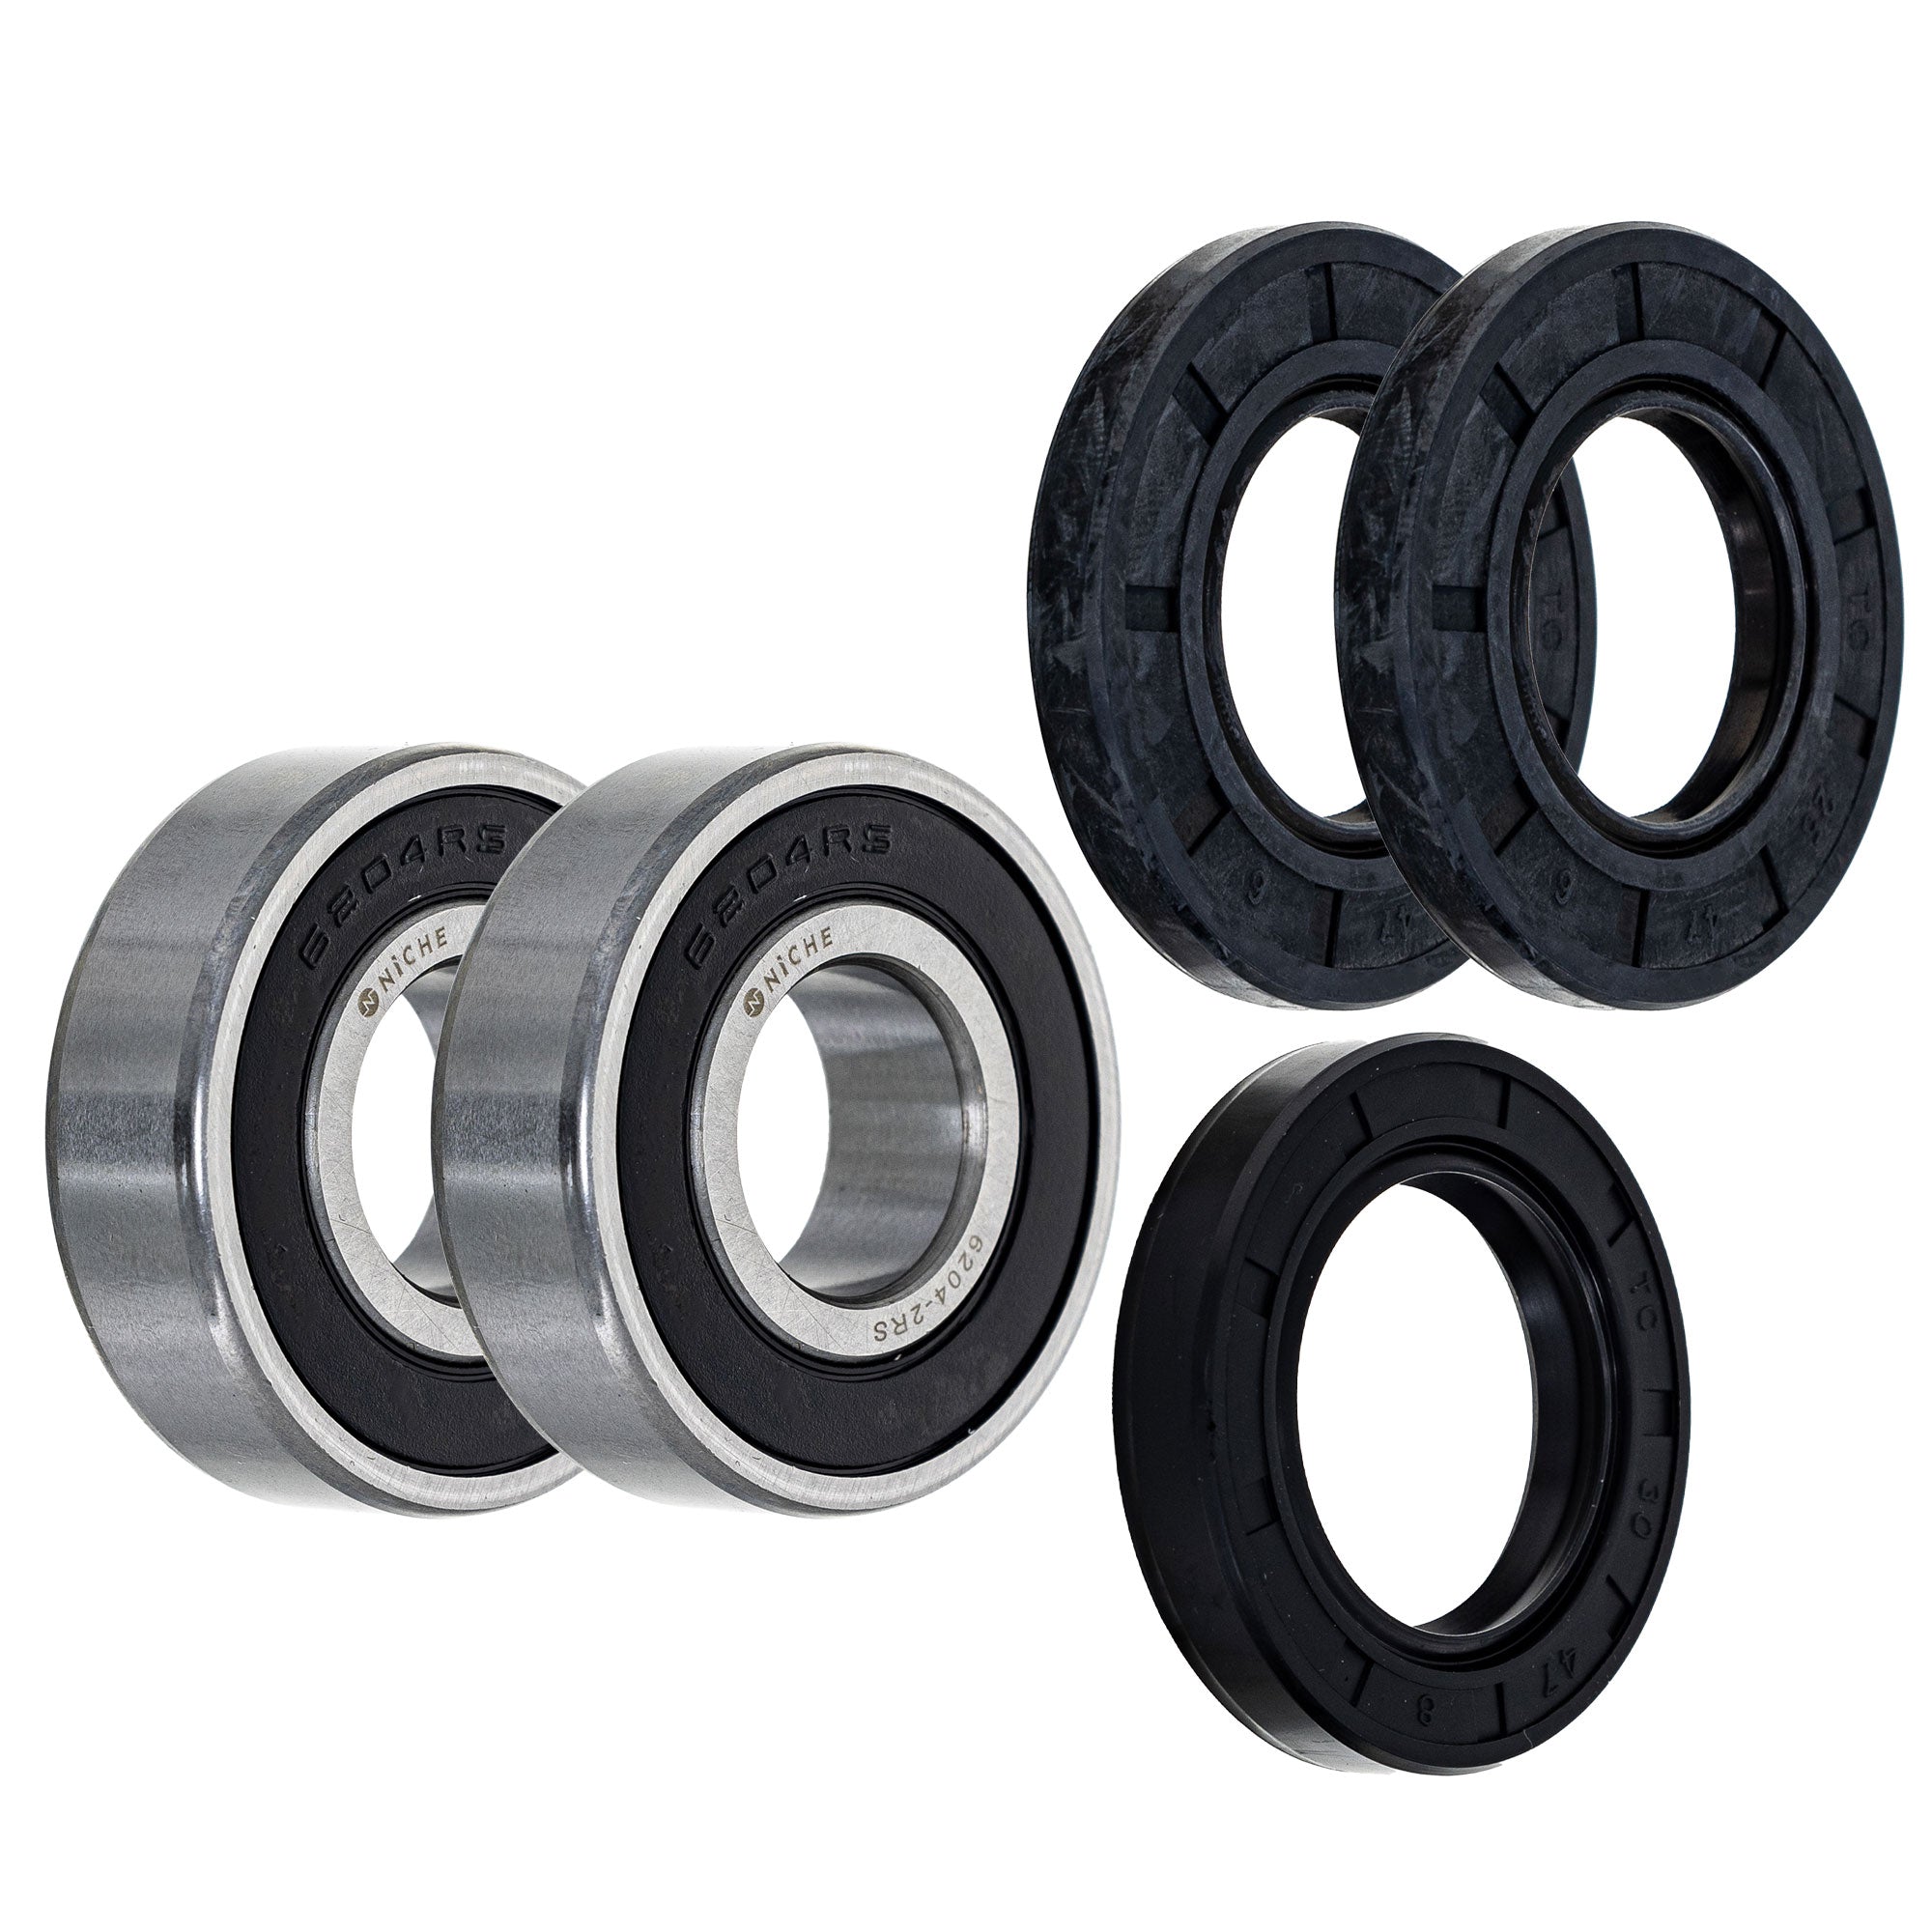 Wheel Bearing Seal Kit for zOTHER Ref No F800GT F800GS NICHE MK1008994